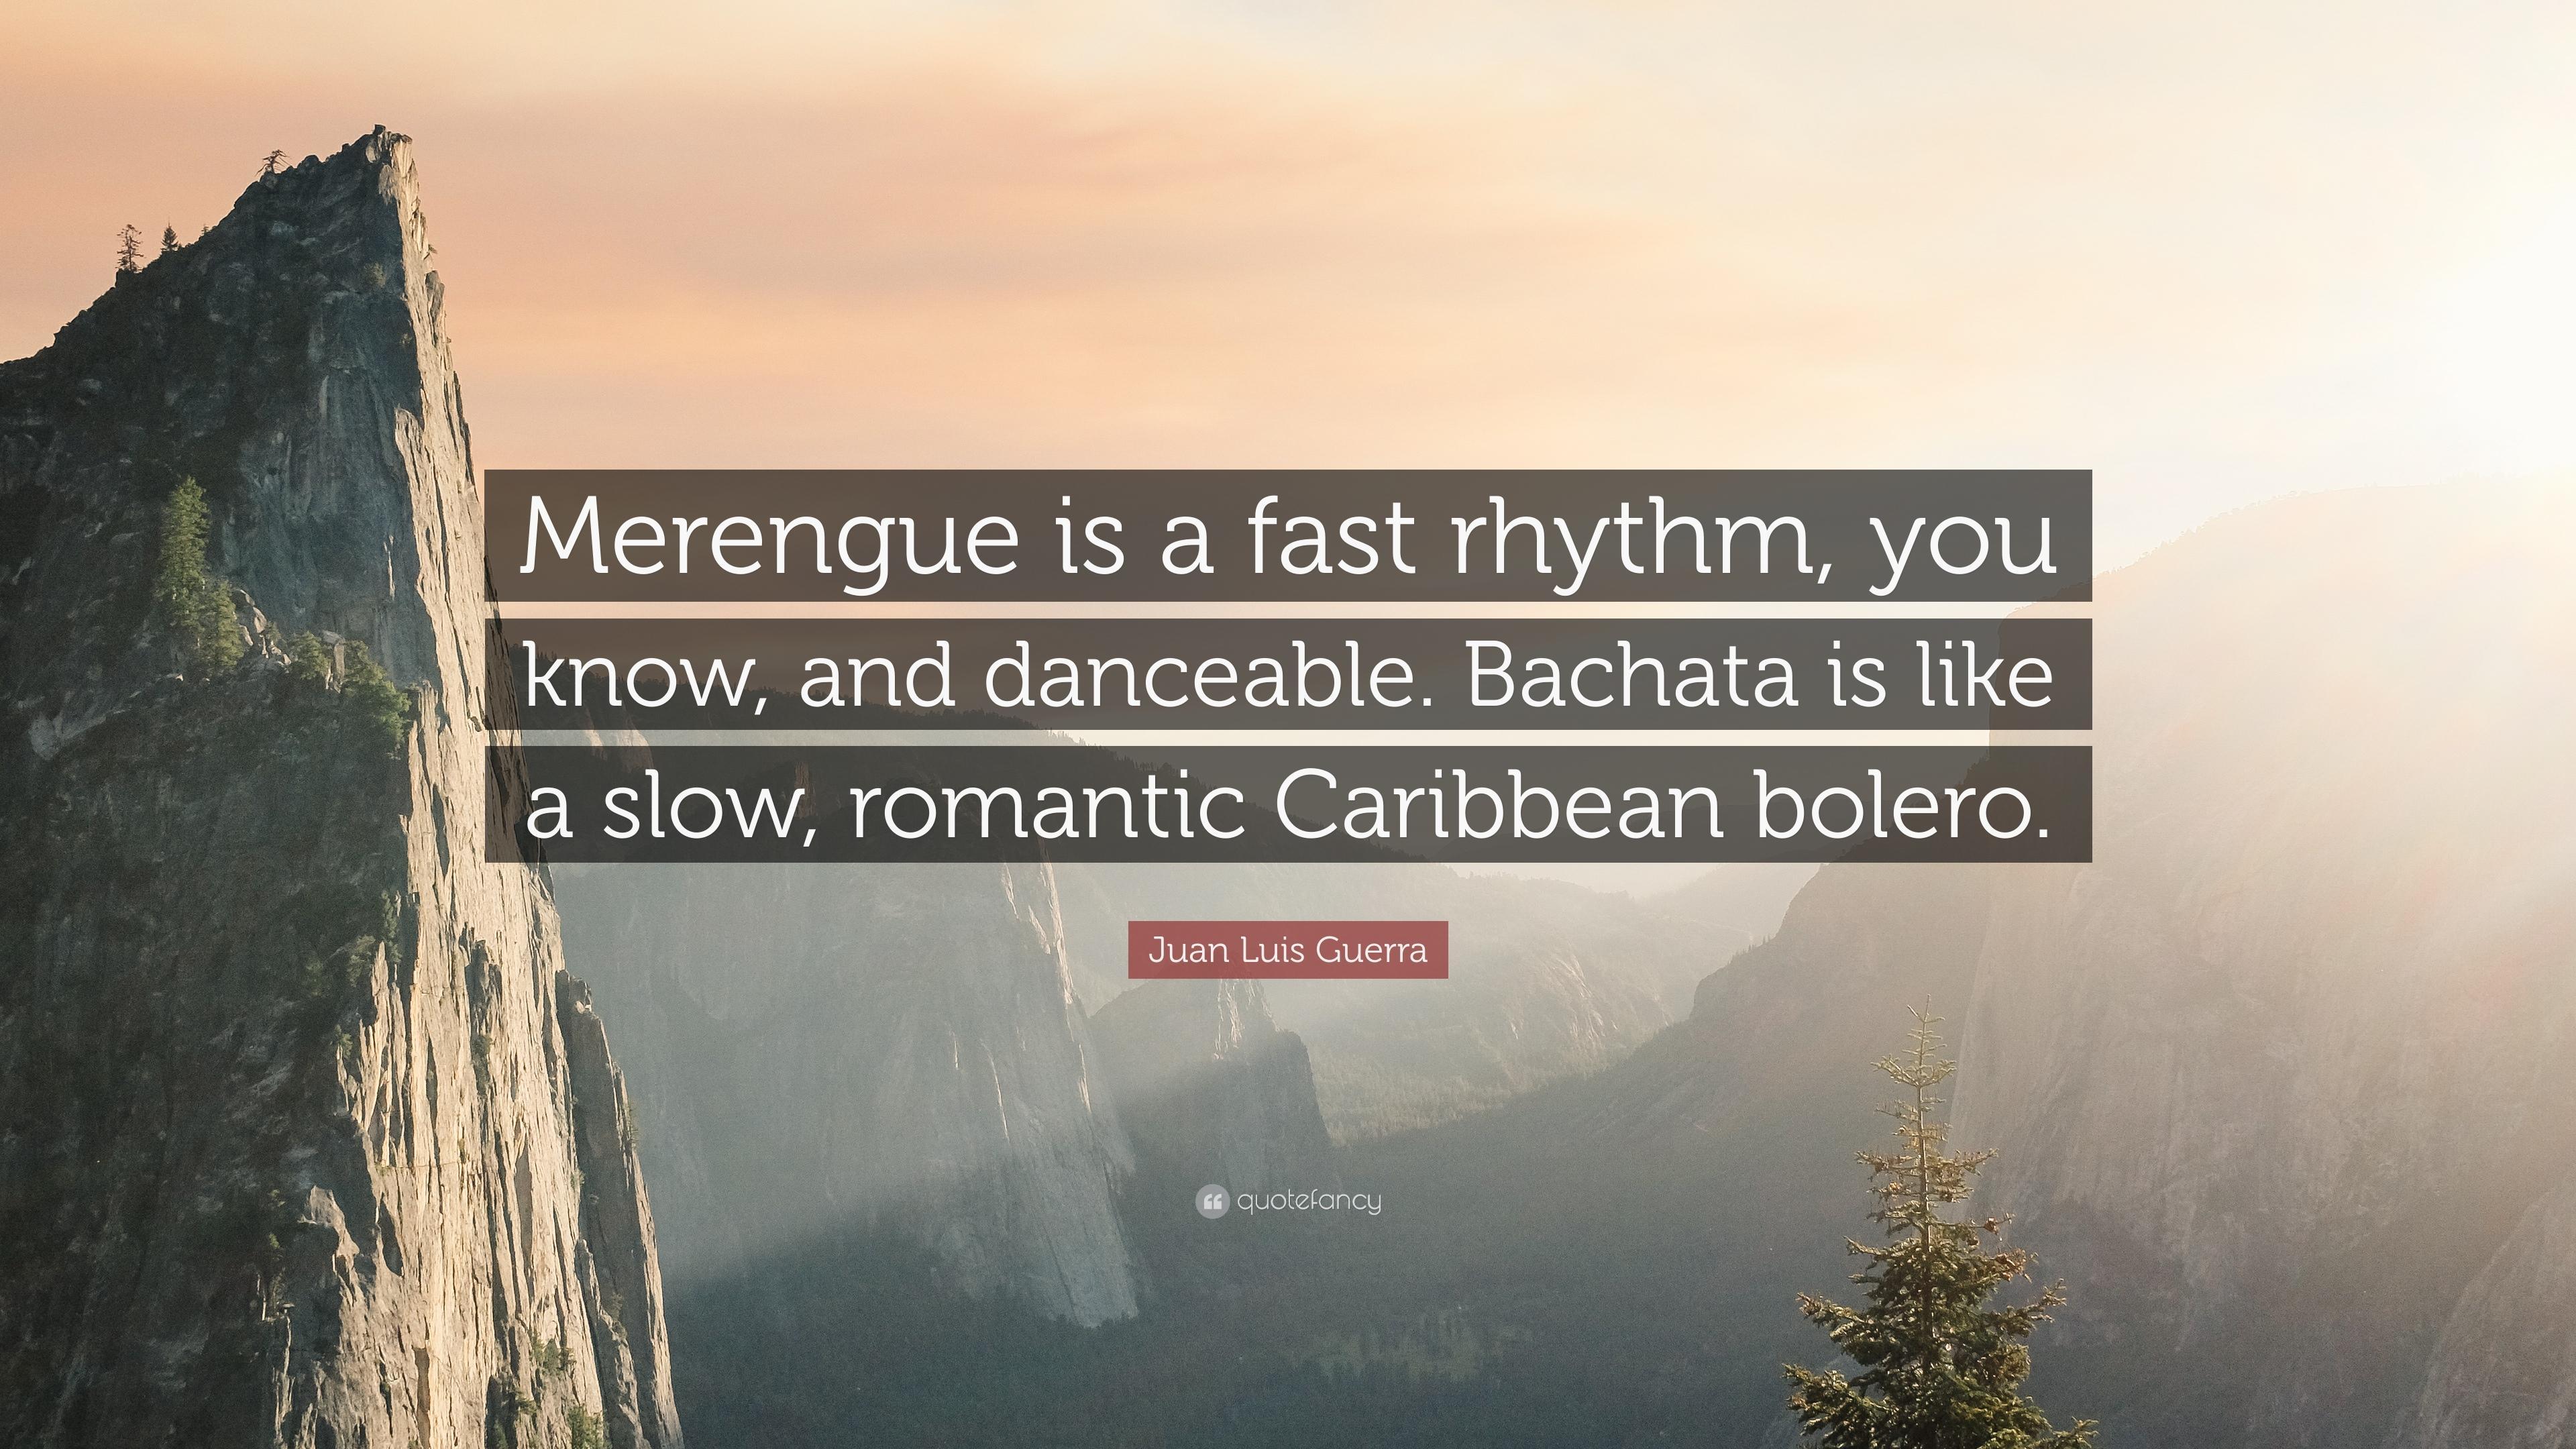 Juan Luis Guerra Quote: “Merengue is a fast rhythm, you know